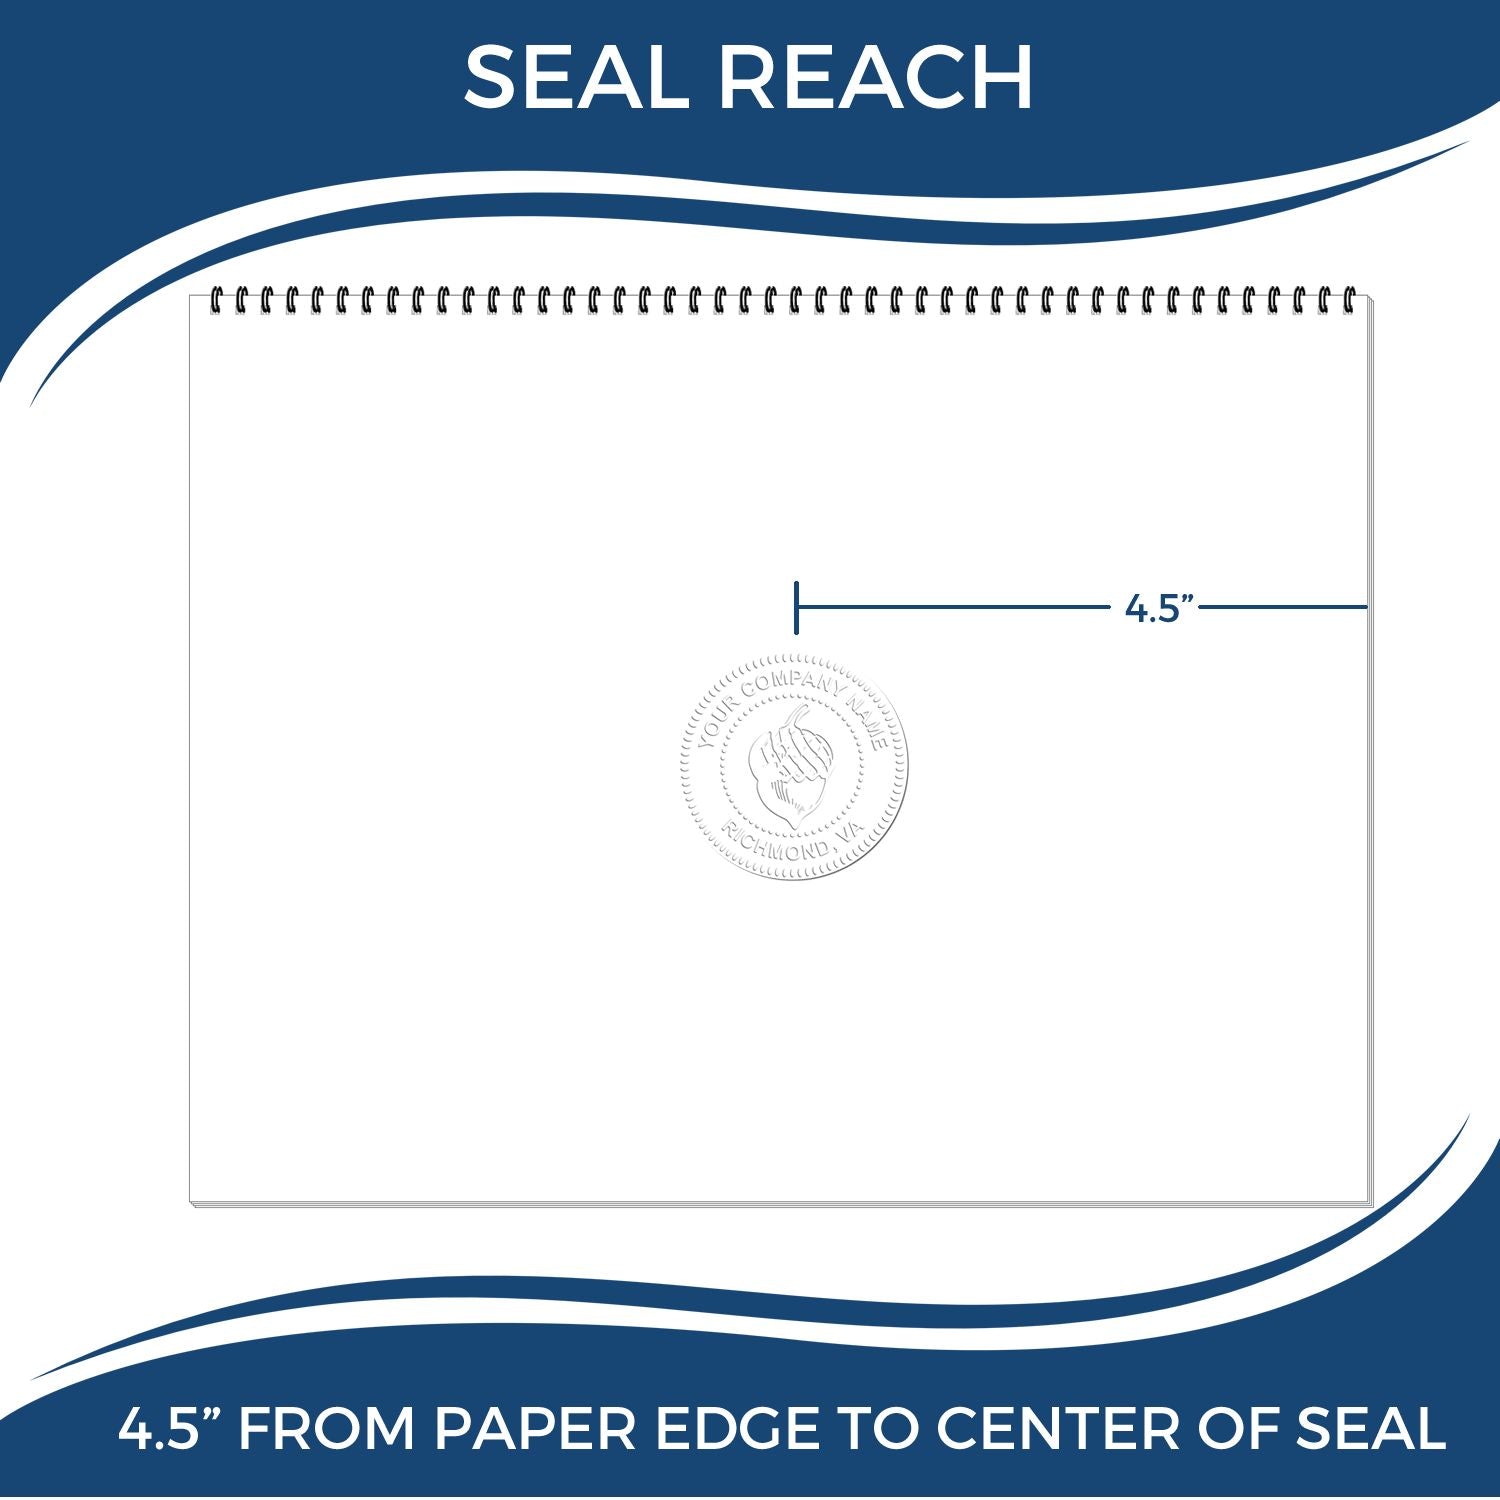 An infographic showing the seal reach which is represented by a ruler and a miniature seal image of the State of New Jersey Extended Long Reach Engineer Seal